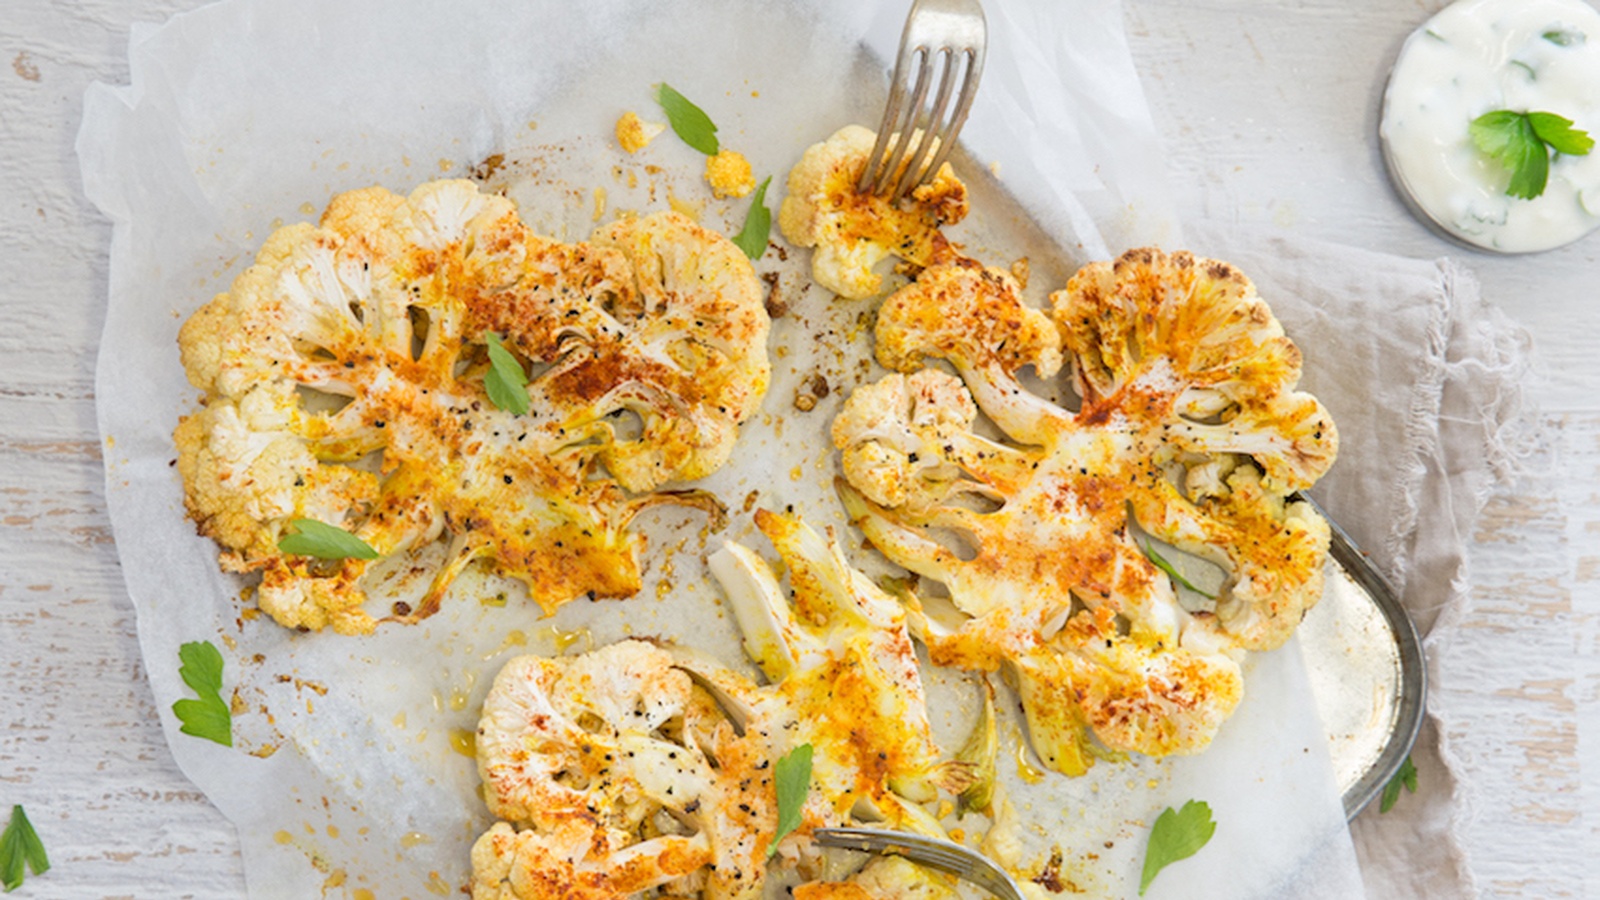 8 Cauliflower Recipes to Help You Remove Refined Carbohydrates